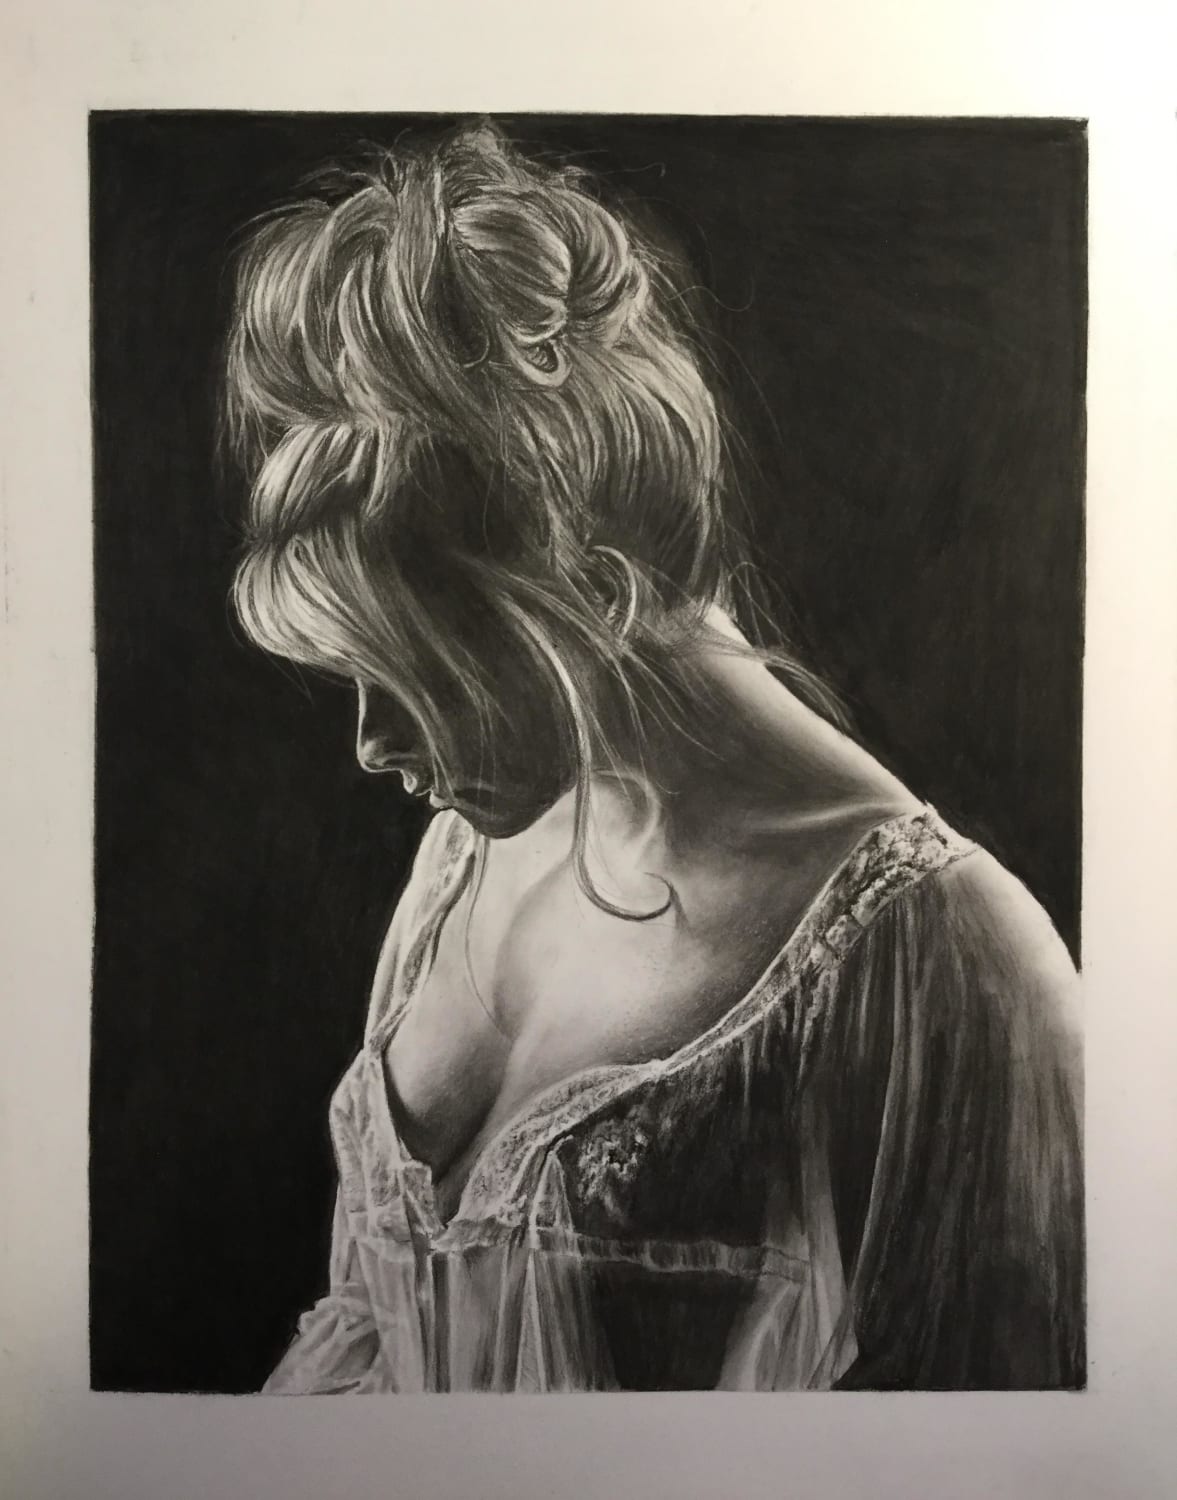 Charcoal of a woman